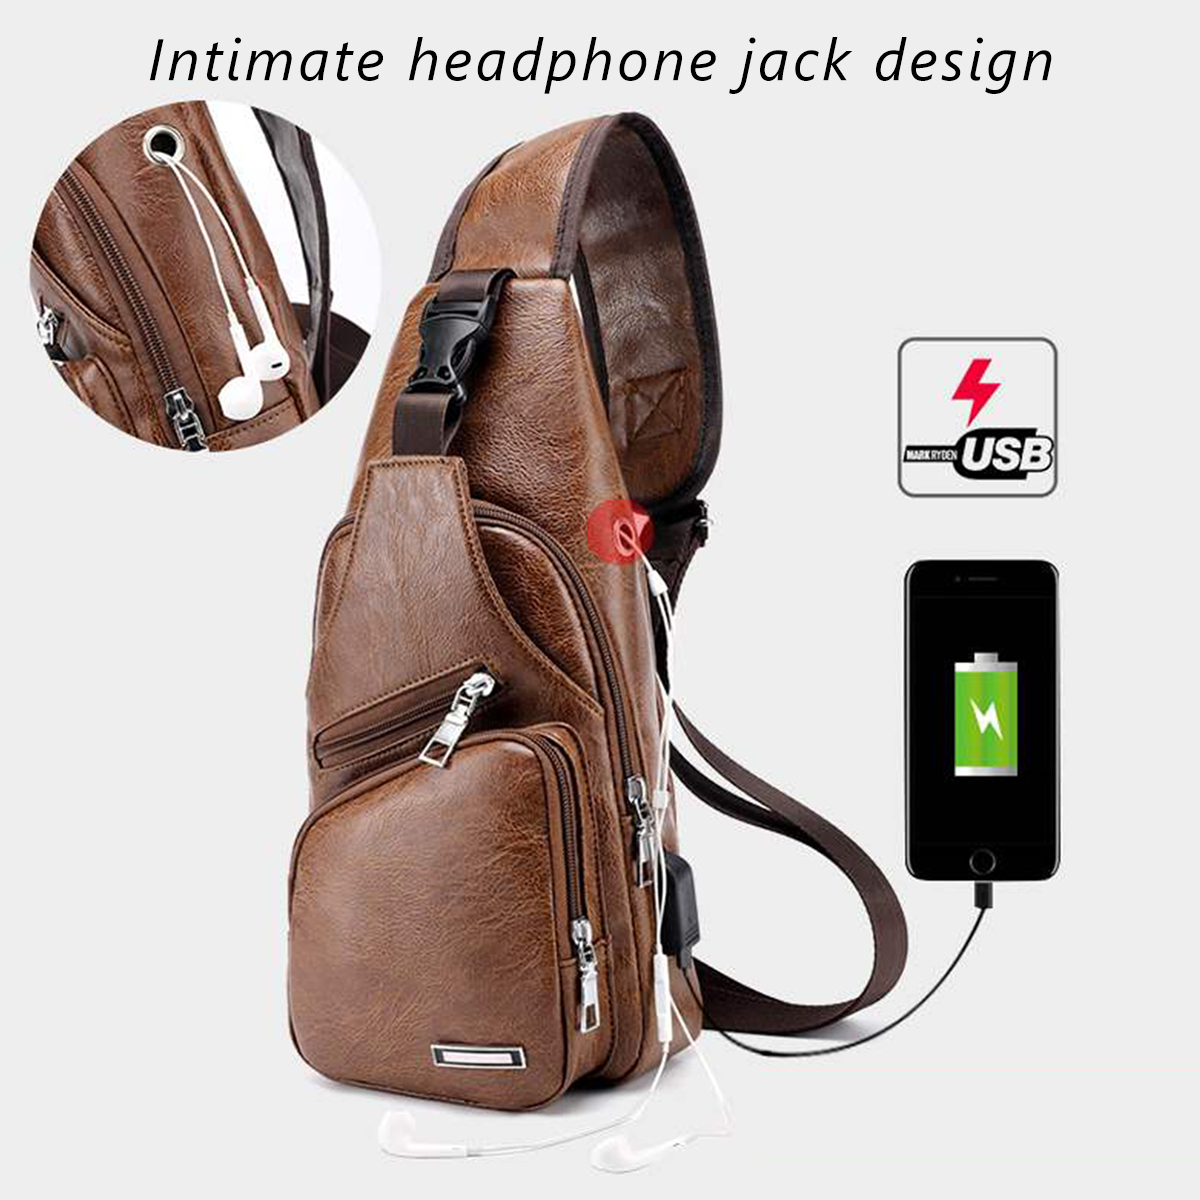 Casual-Outdoor-Travel-USB-Charging-Port-Sling-Bag-Leather-Chest-Bag-Crossbody-Bag-1637756-2